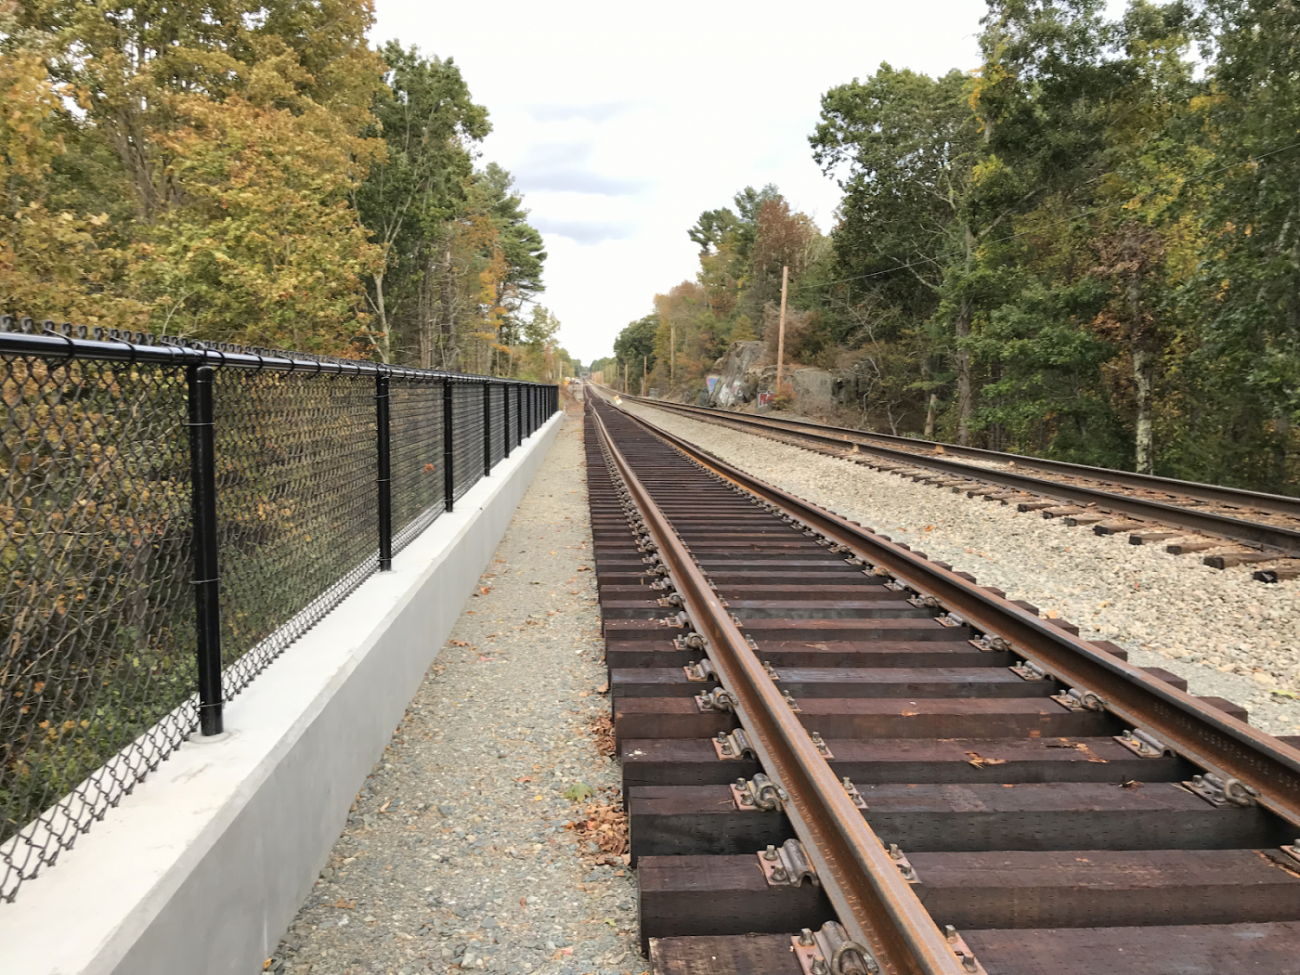 Completed retaining wall with new second track assembled outside of Walpole Station in 2019